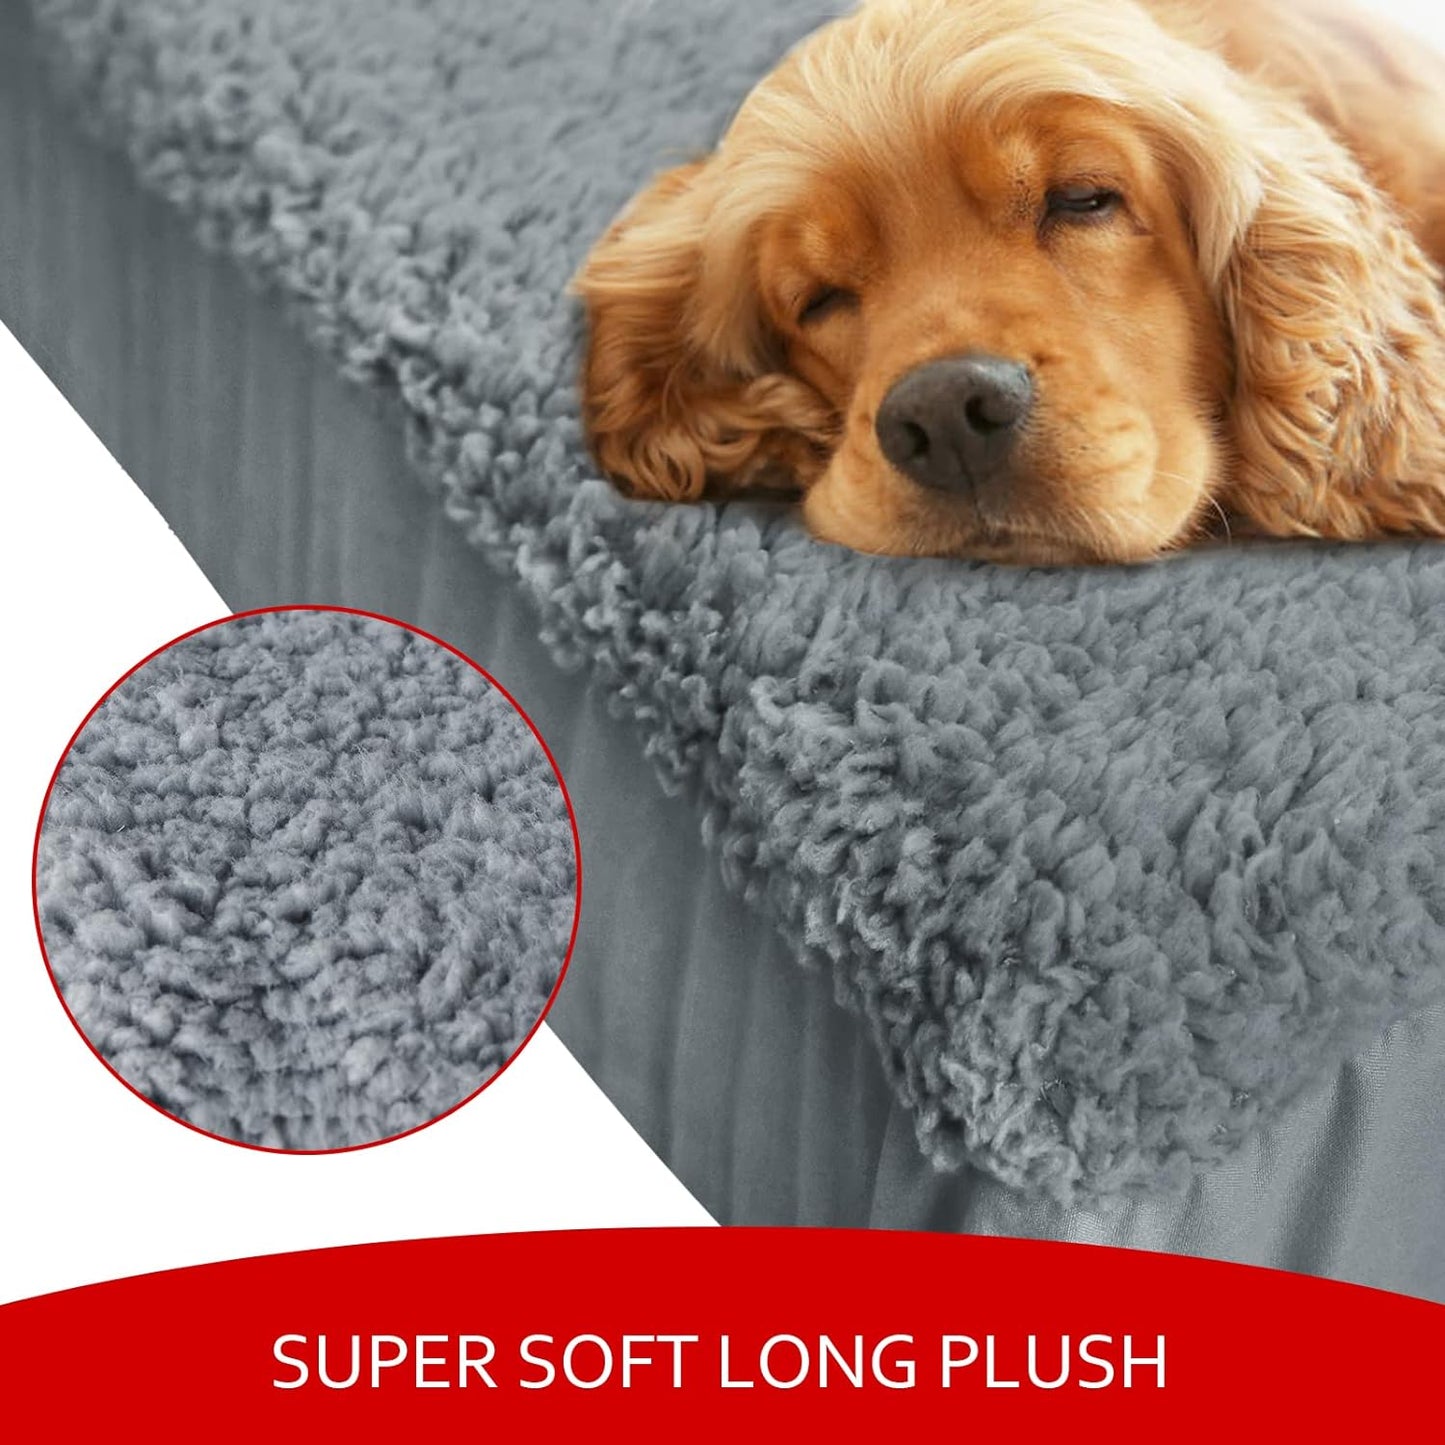 Dog Bed Covers Soft Plush Replacement Washable, Waterproof Dog Bed Liner,long plush fabric,Grey